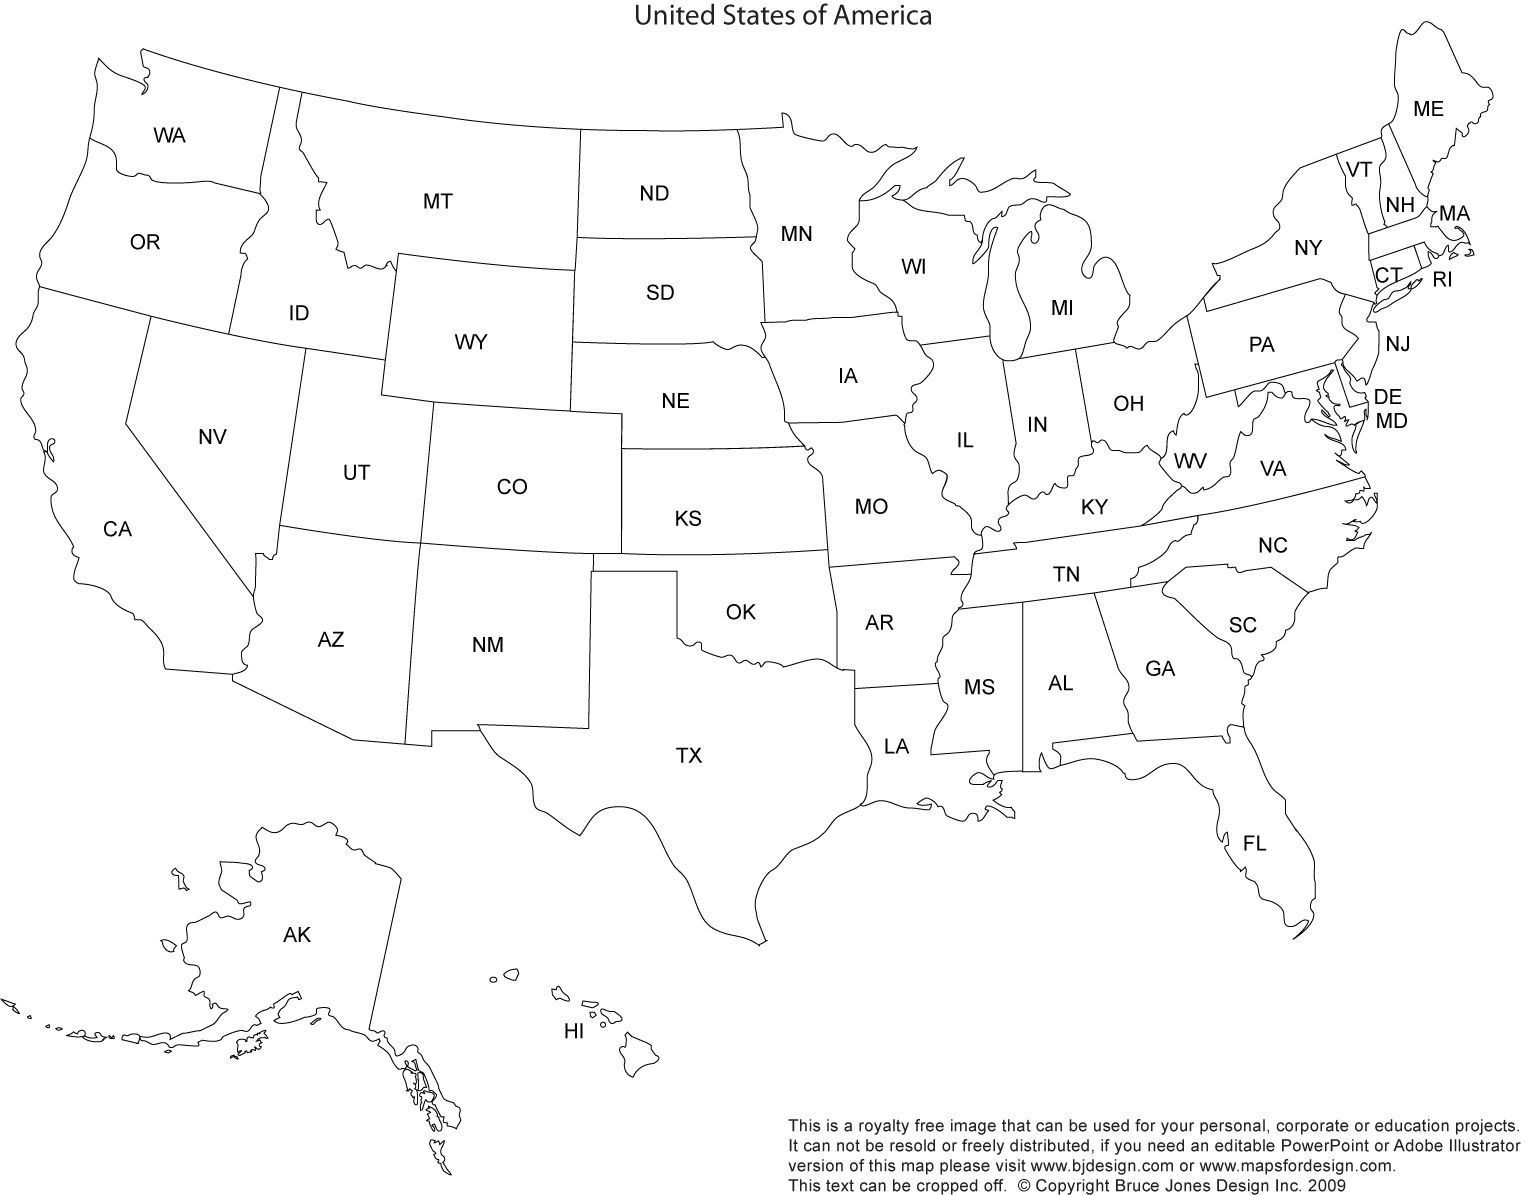 Print Out A Blank Map Of The Us And Have The Kids Color In States - Free Printable Labeled Map Of The United States